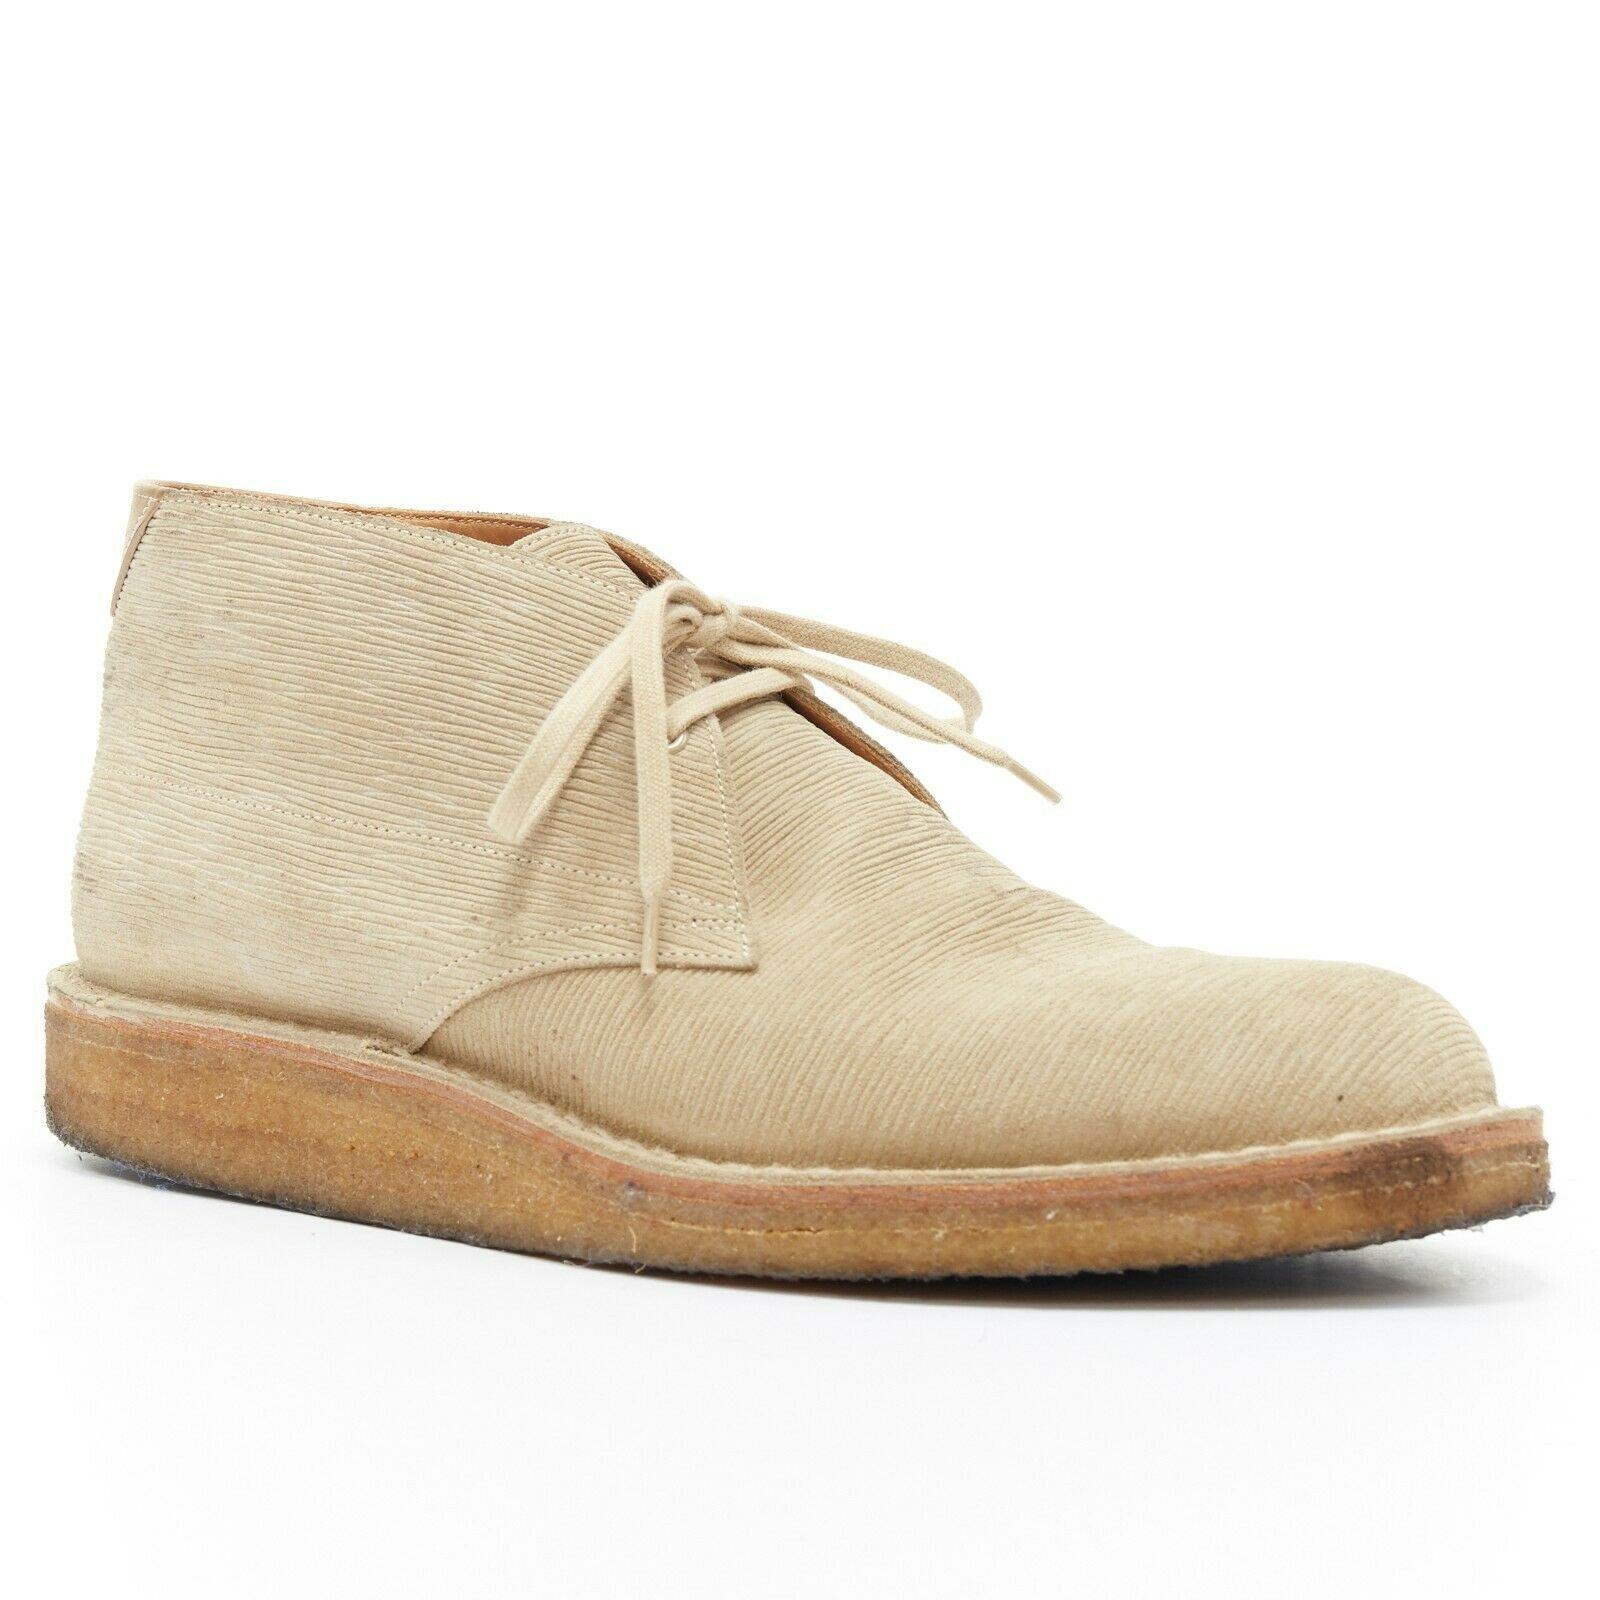 LOUIS VUITTON taupe sand epi suede crepe sole ankle desert boot UK5 EU39 
Reference: TGAS/A03125 
Brand: Louis Vuitton 
Material: Suede 
Color: Brown 
Extra Detail: Desert boot. Light beige stone upper. Epi textured suede leather upper. Round toe.